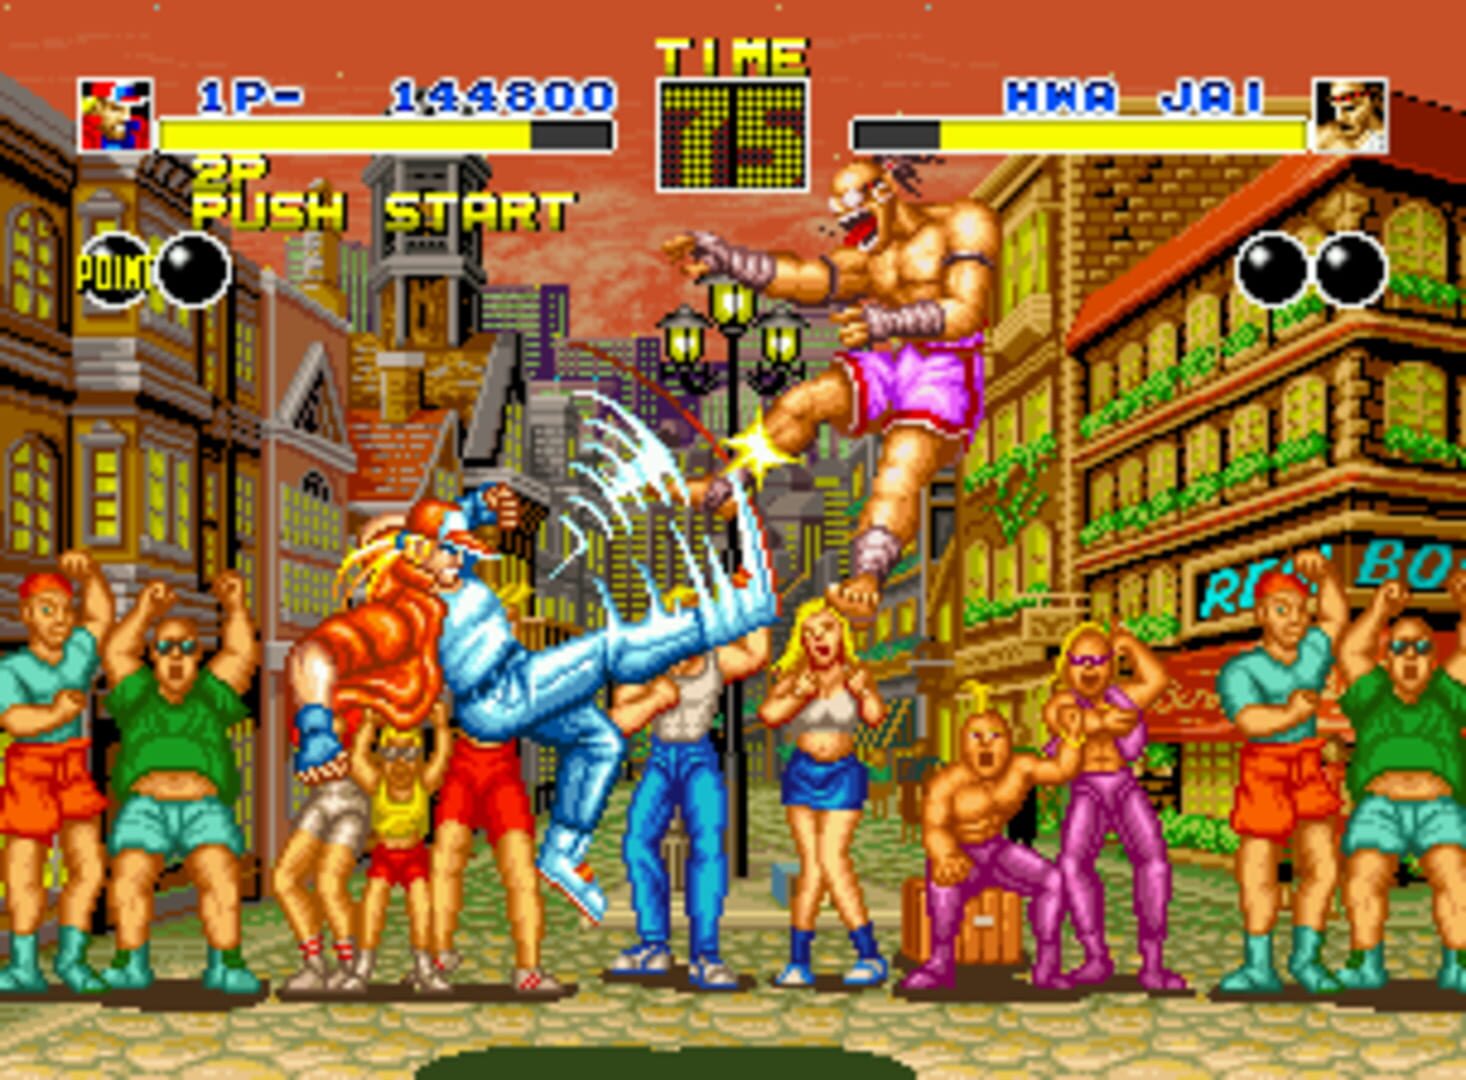 Fatal Fury: King of Fighters